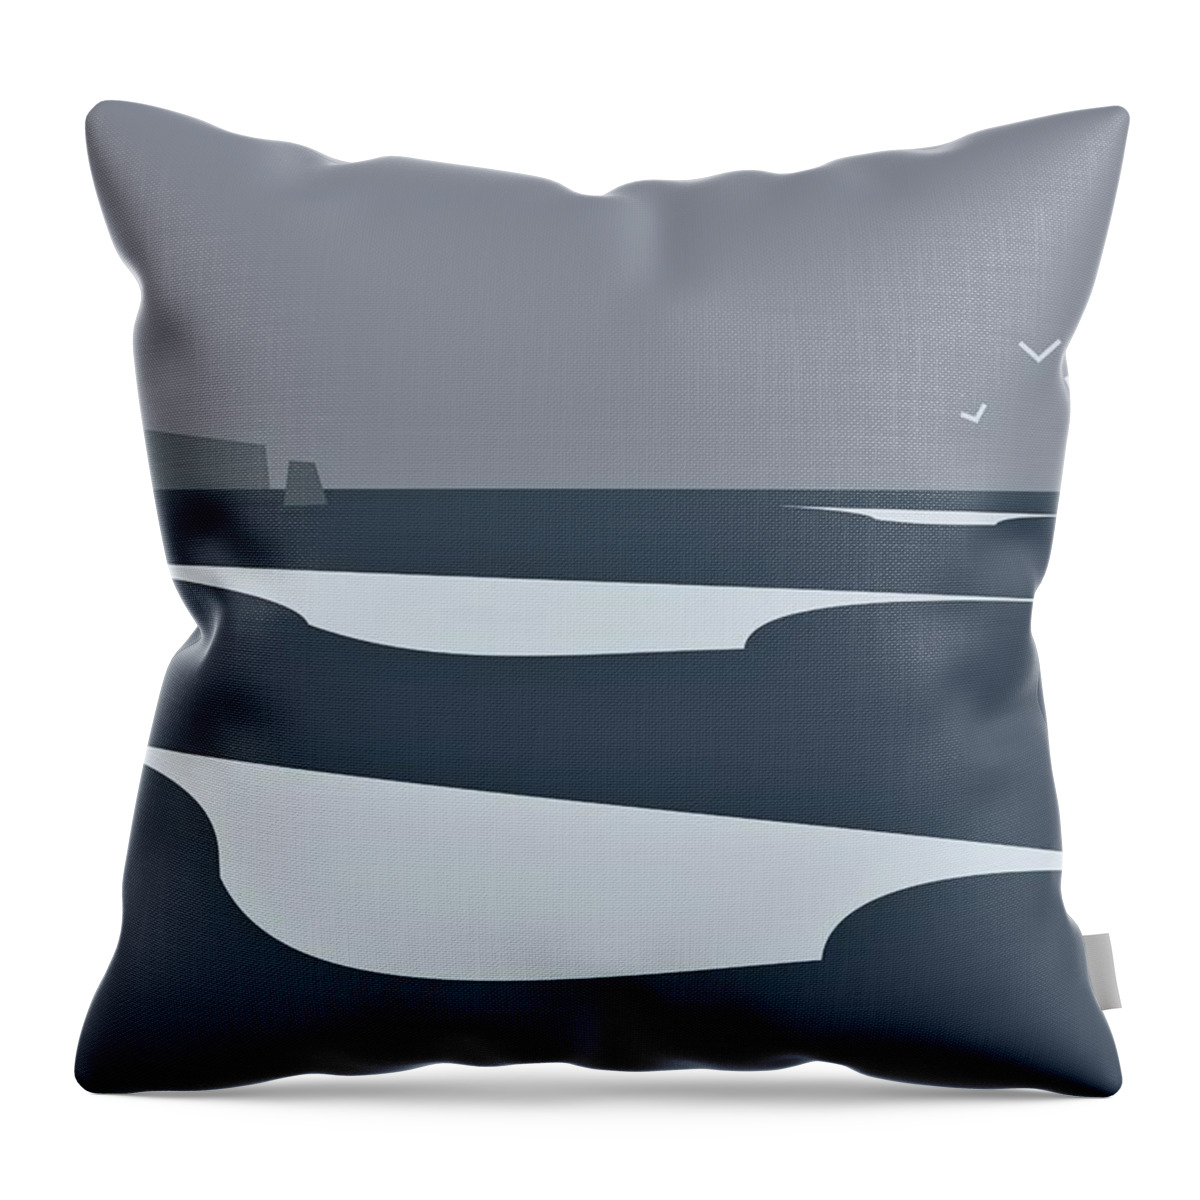 Sea Throw Pillow featuring the digital art Big Waves by Fatline Graphic Art